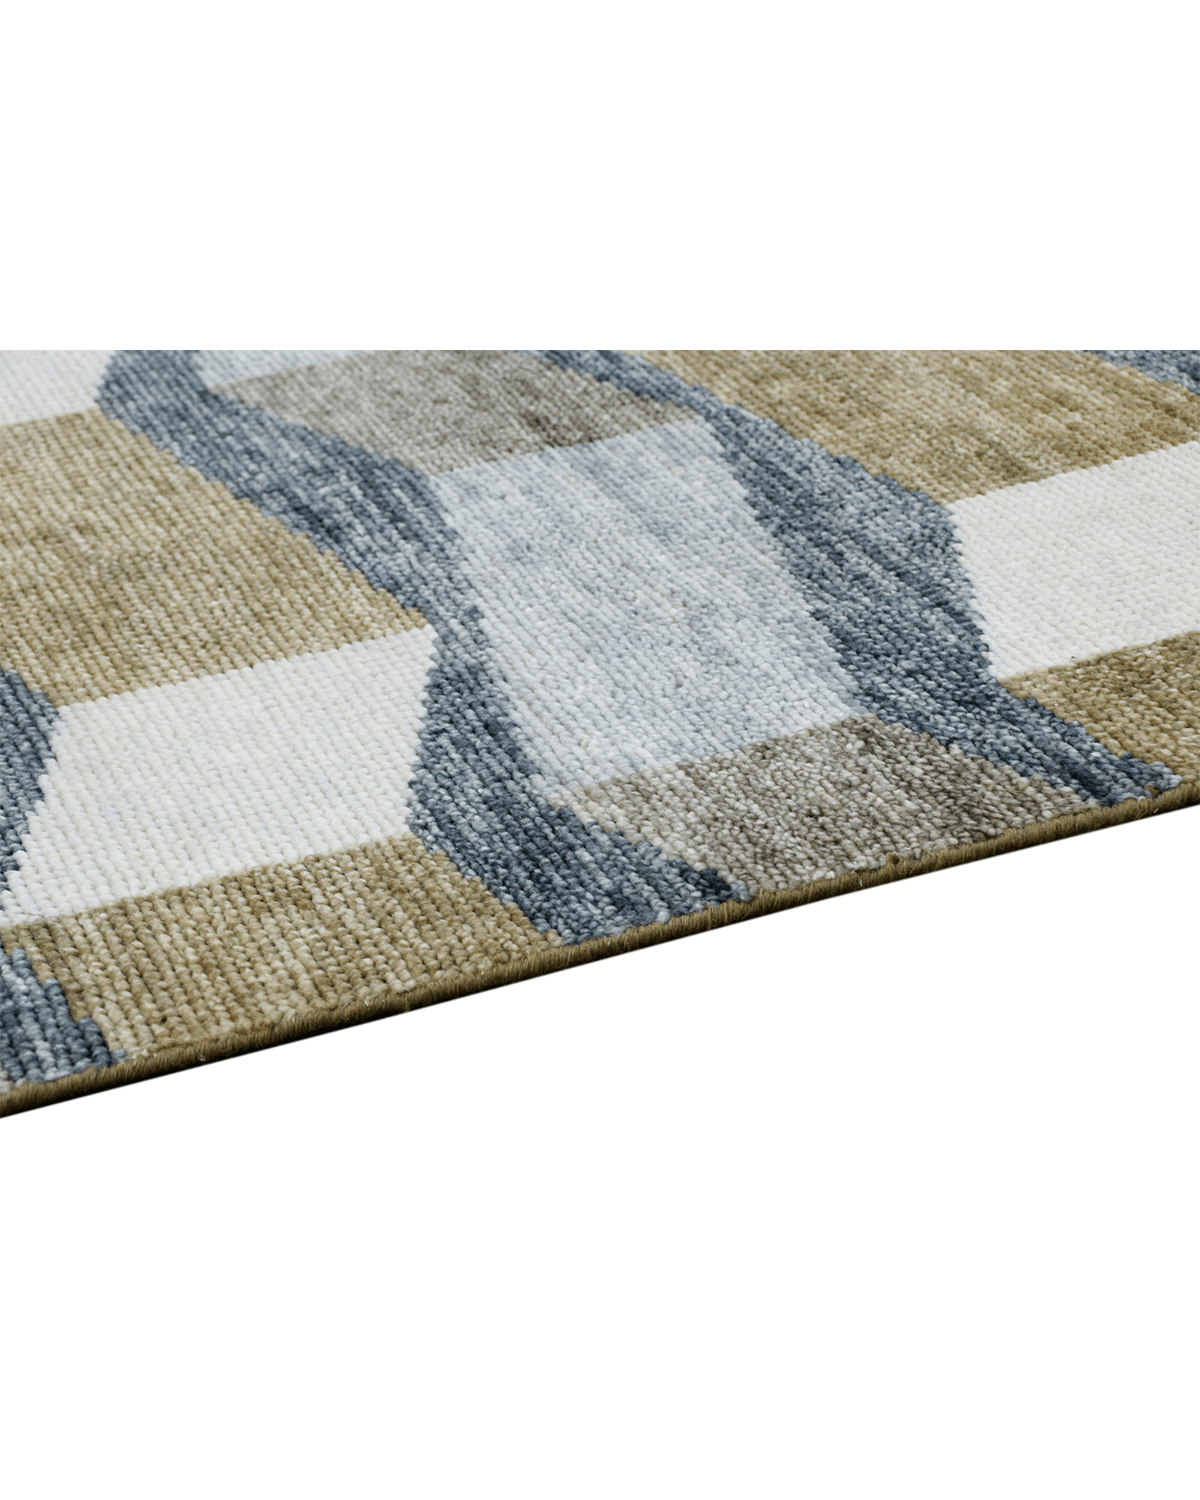 Hand-knotted Modern Rug (CAD2022-48)